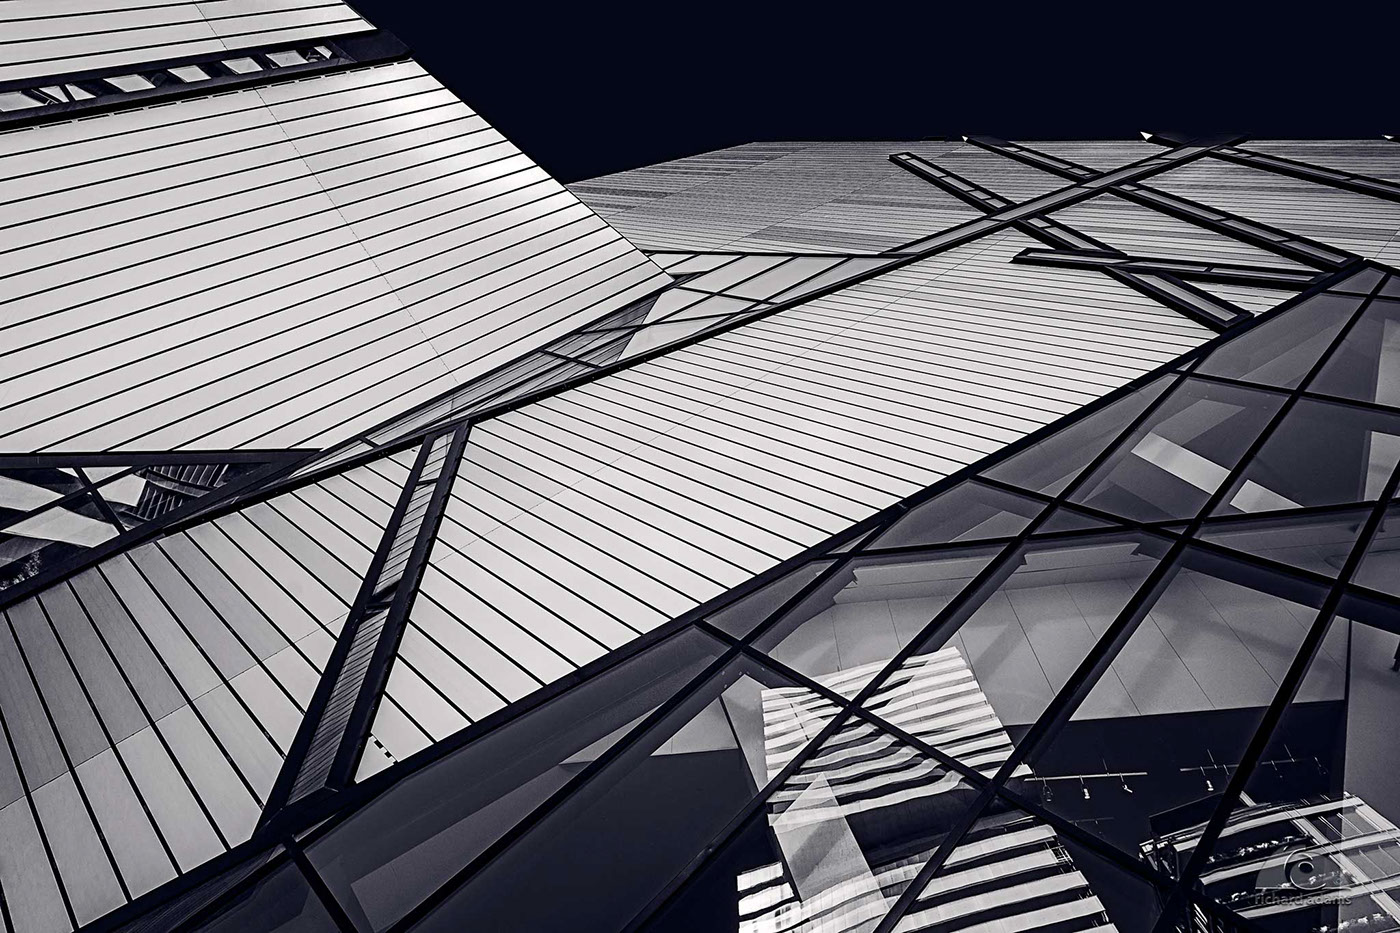 rom crystal architecture exterior Toronto richard adams building black and white monochrome abstract